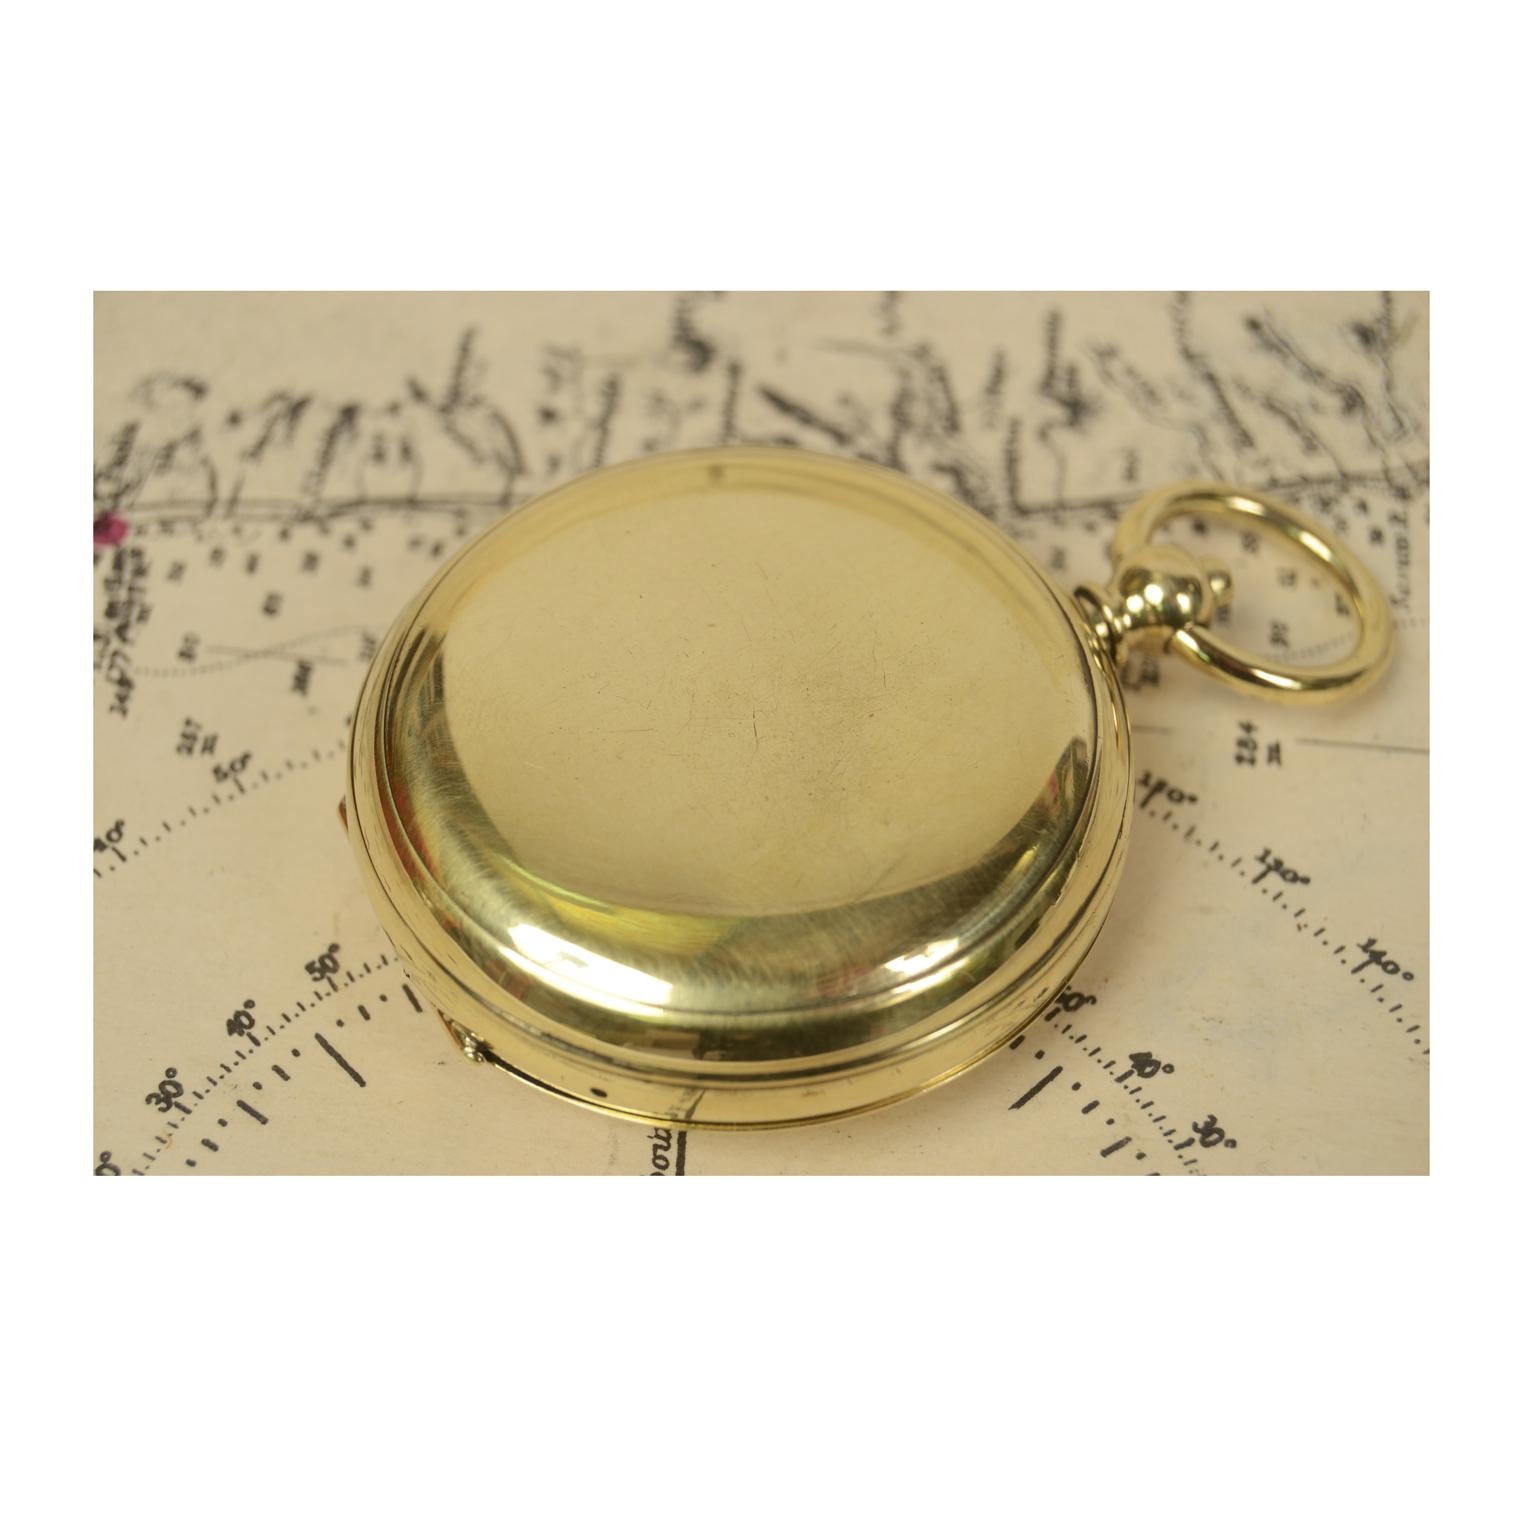 Pocket Compass Used by RAF Officers in the WWI 1